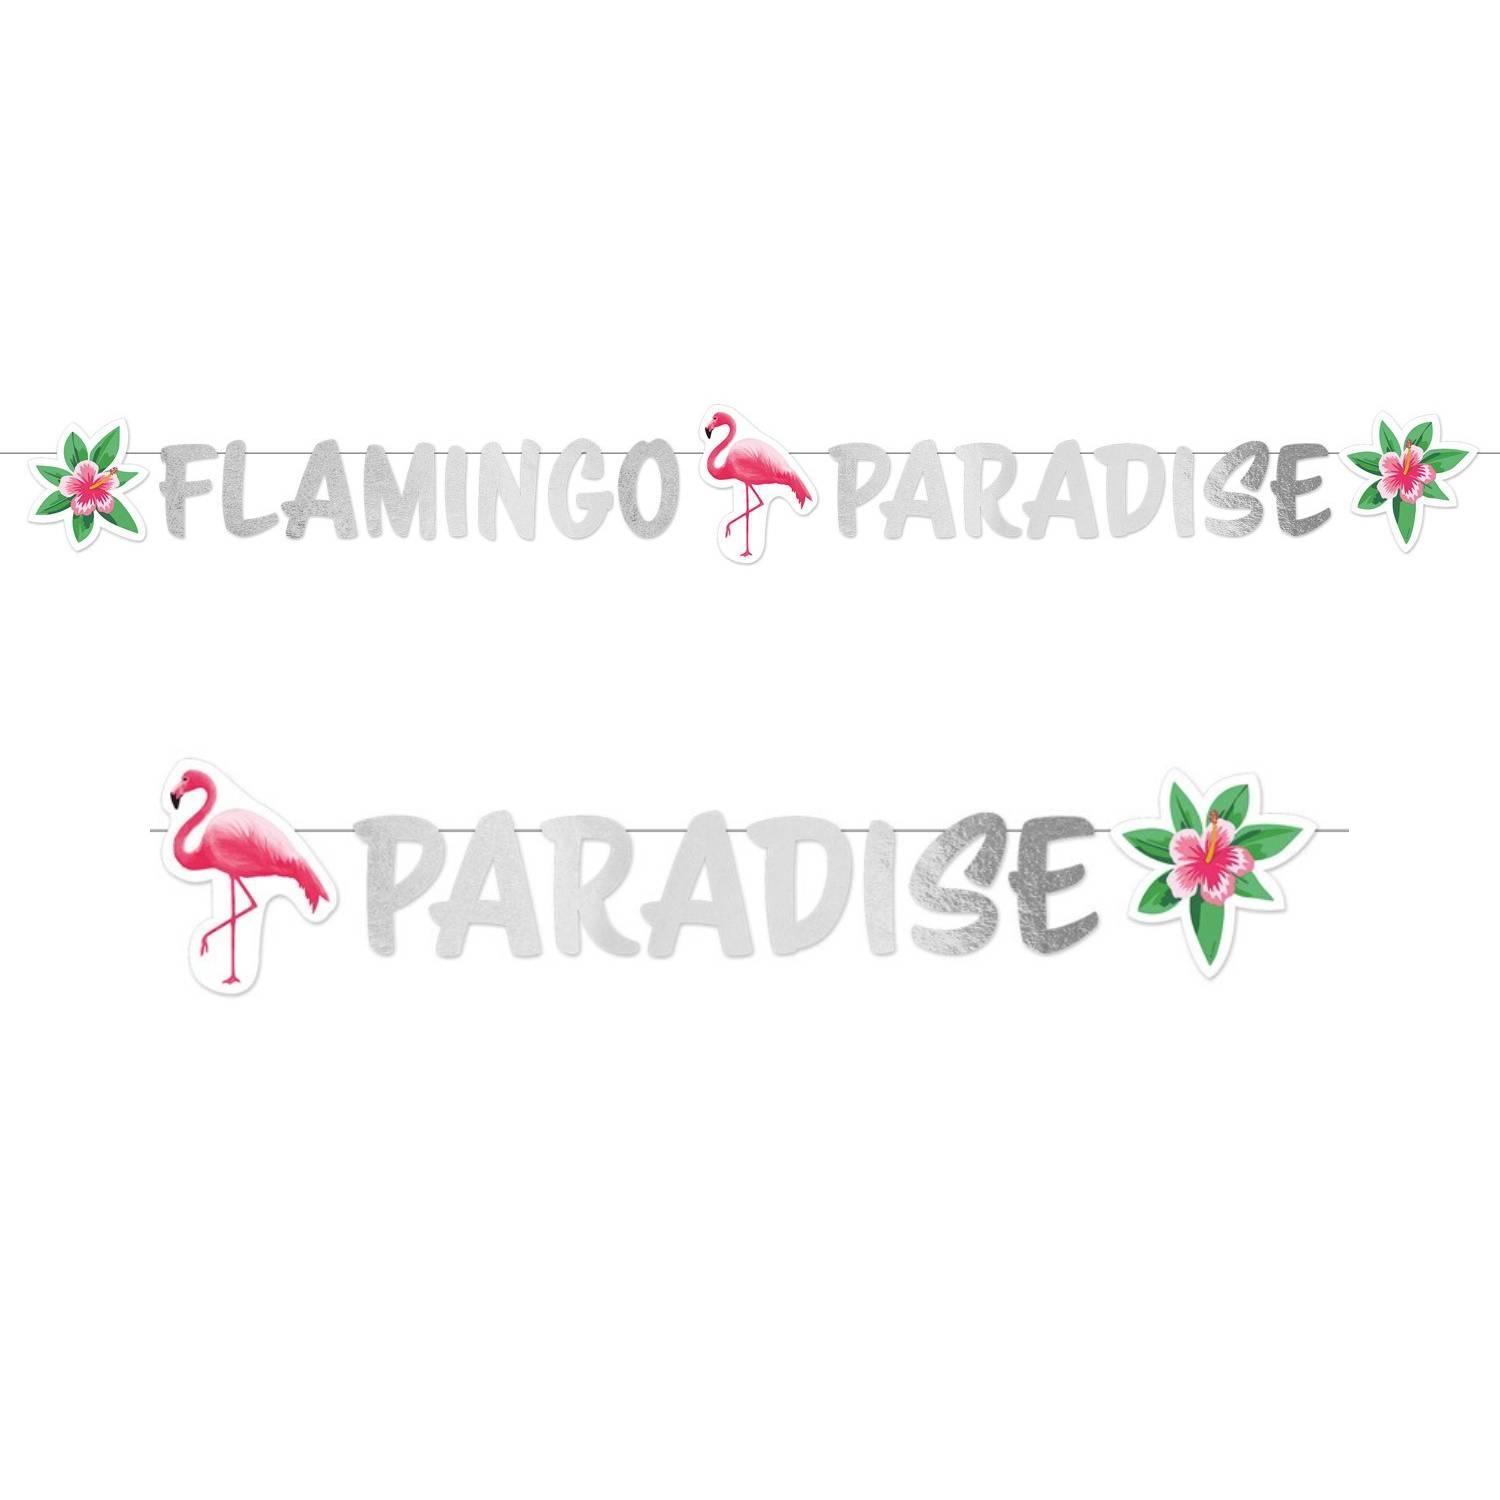 Flamingo Paradise Glitter Letter Banner 1.35m by Amscan 9903332 available here at Karnival Costumes online party shop